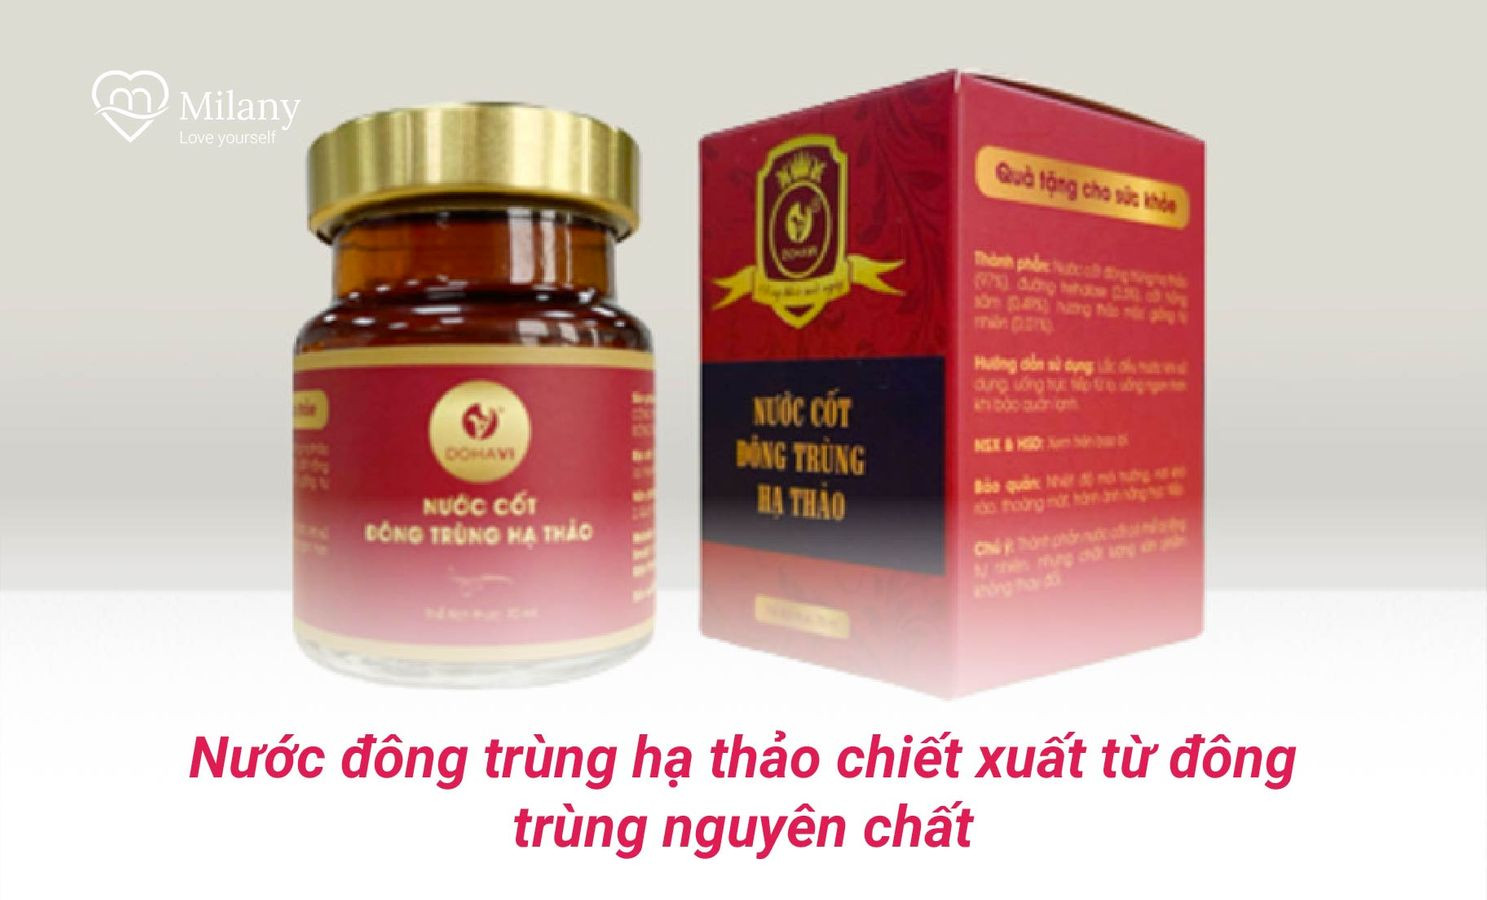 nuoc dong trung ha thao